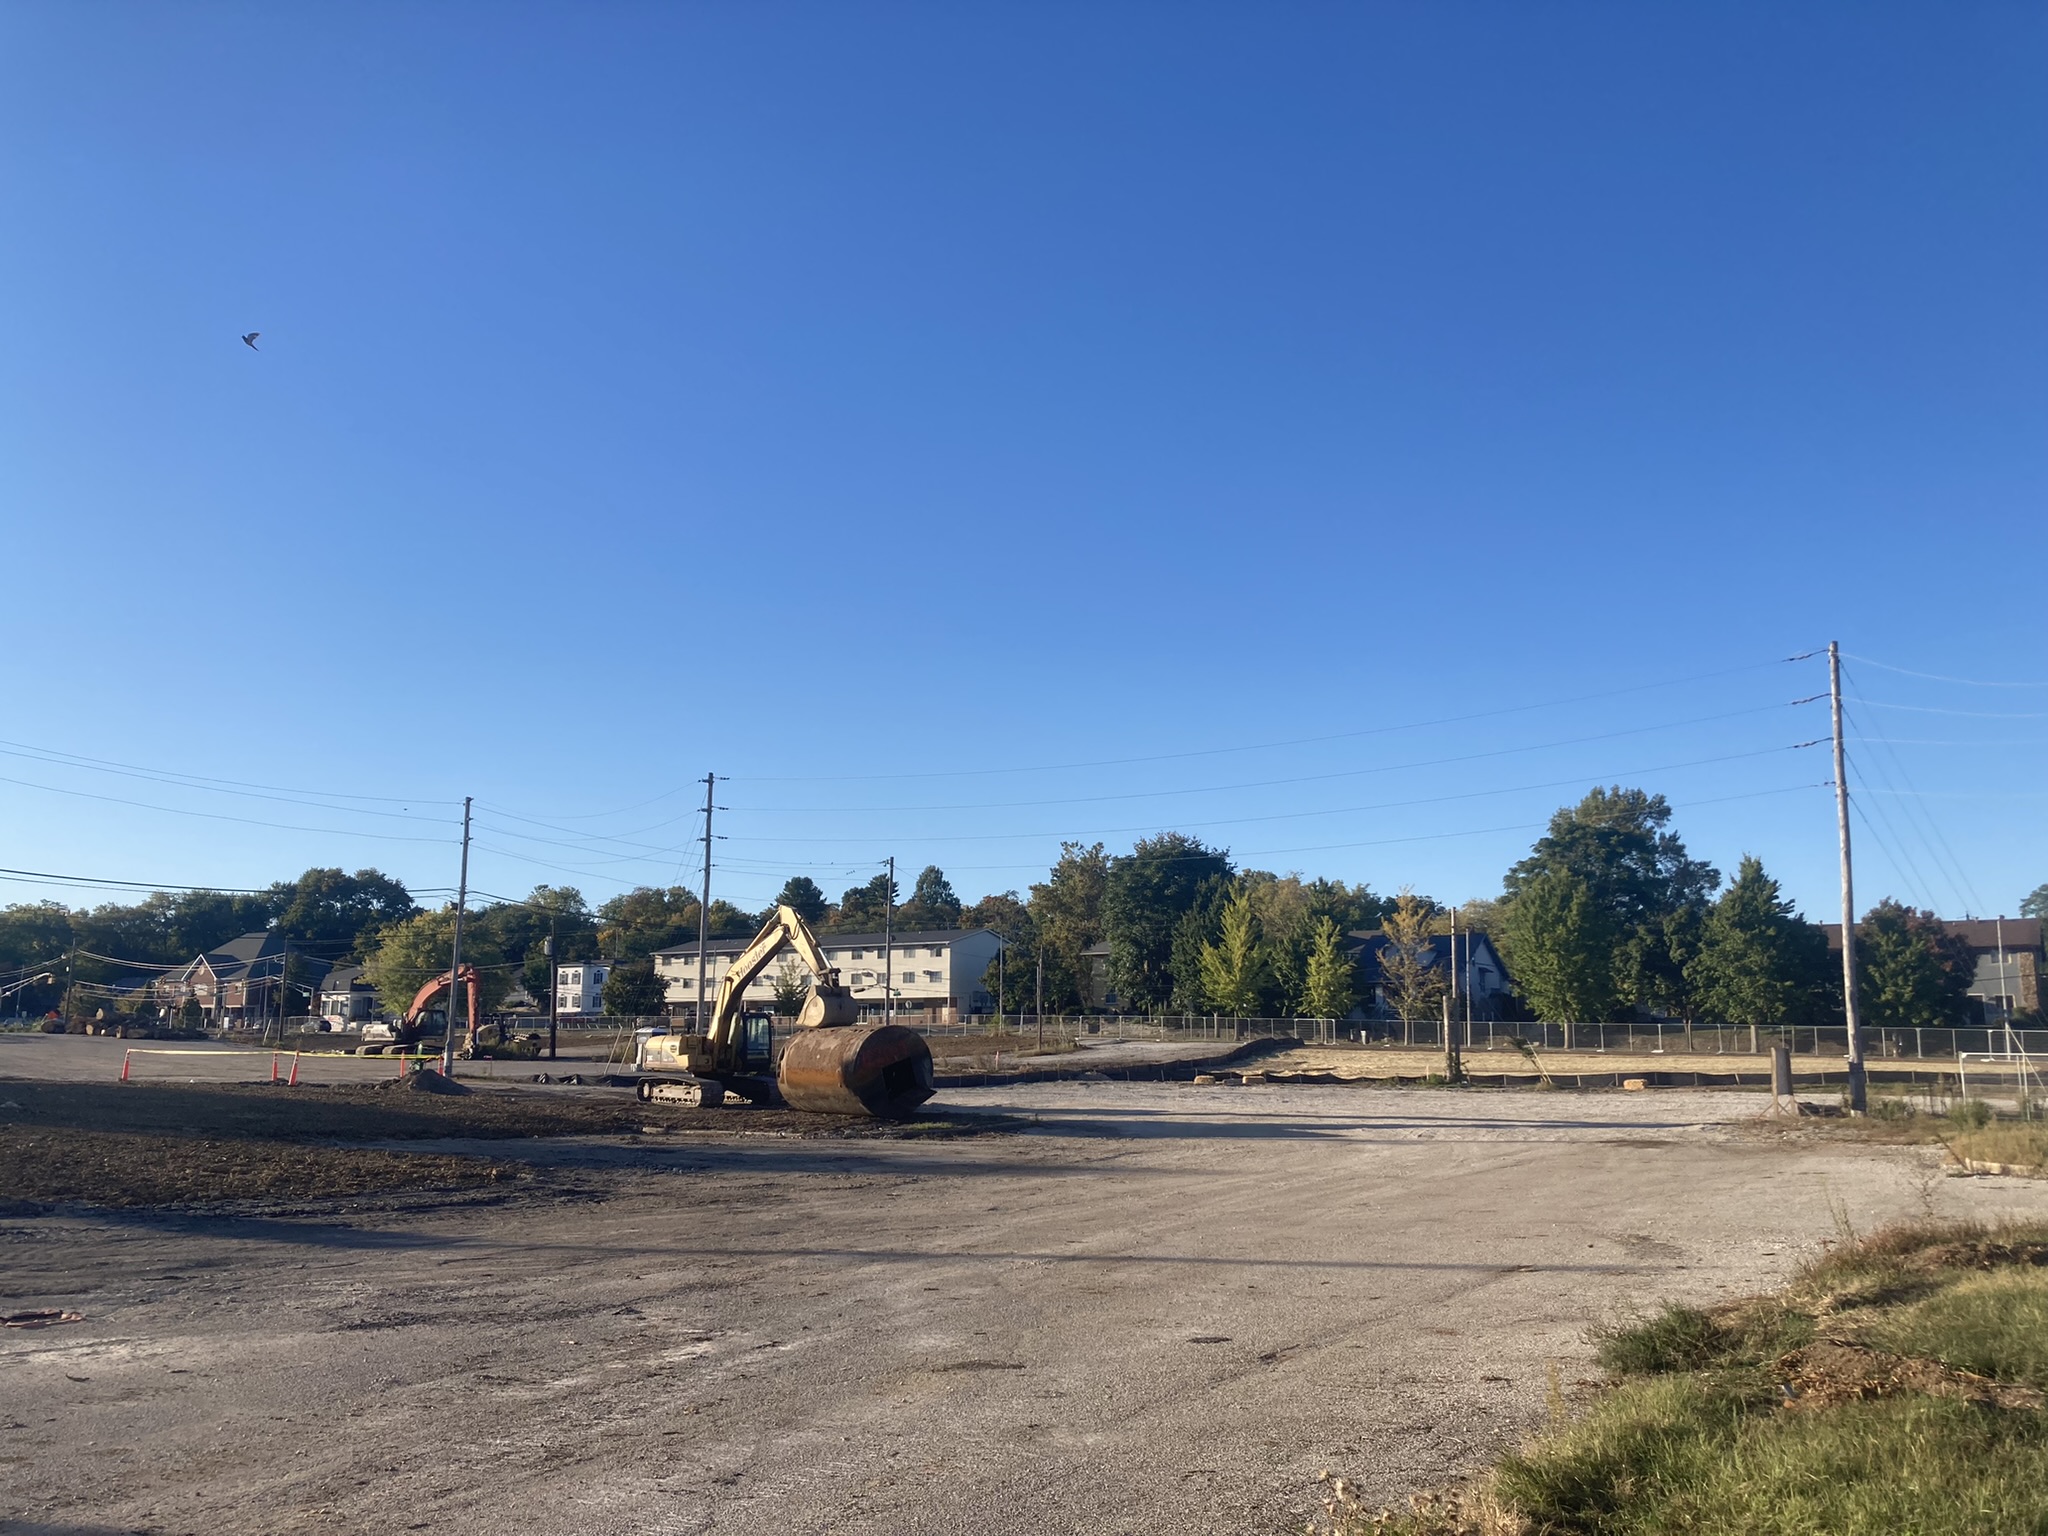 An excavator sits in a cleared, fenced, construction area; its bucket rests on a cylindrical tank. In the background are telephone poles and wires, trees, and residential (or small office) buildings. 